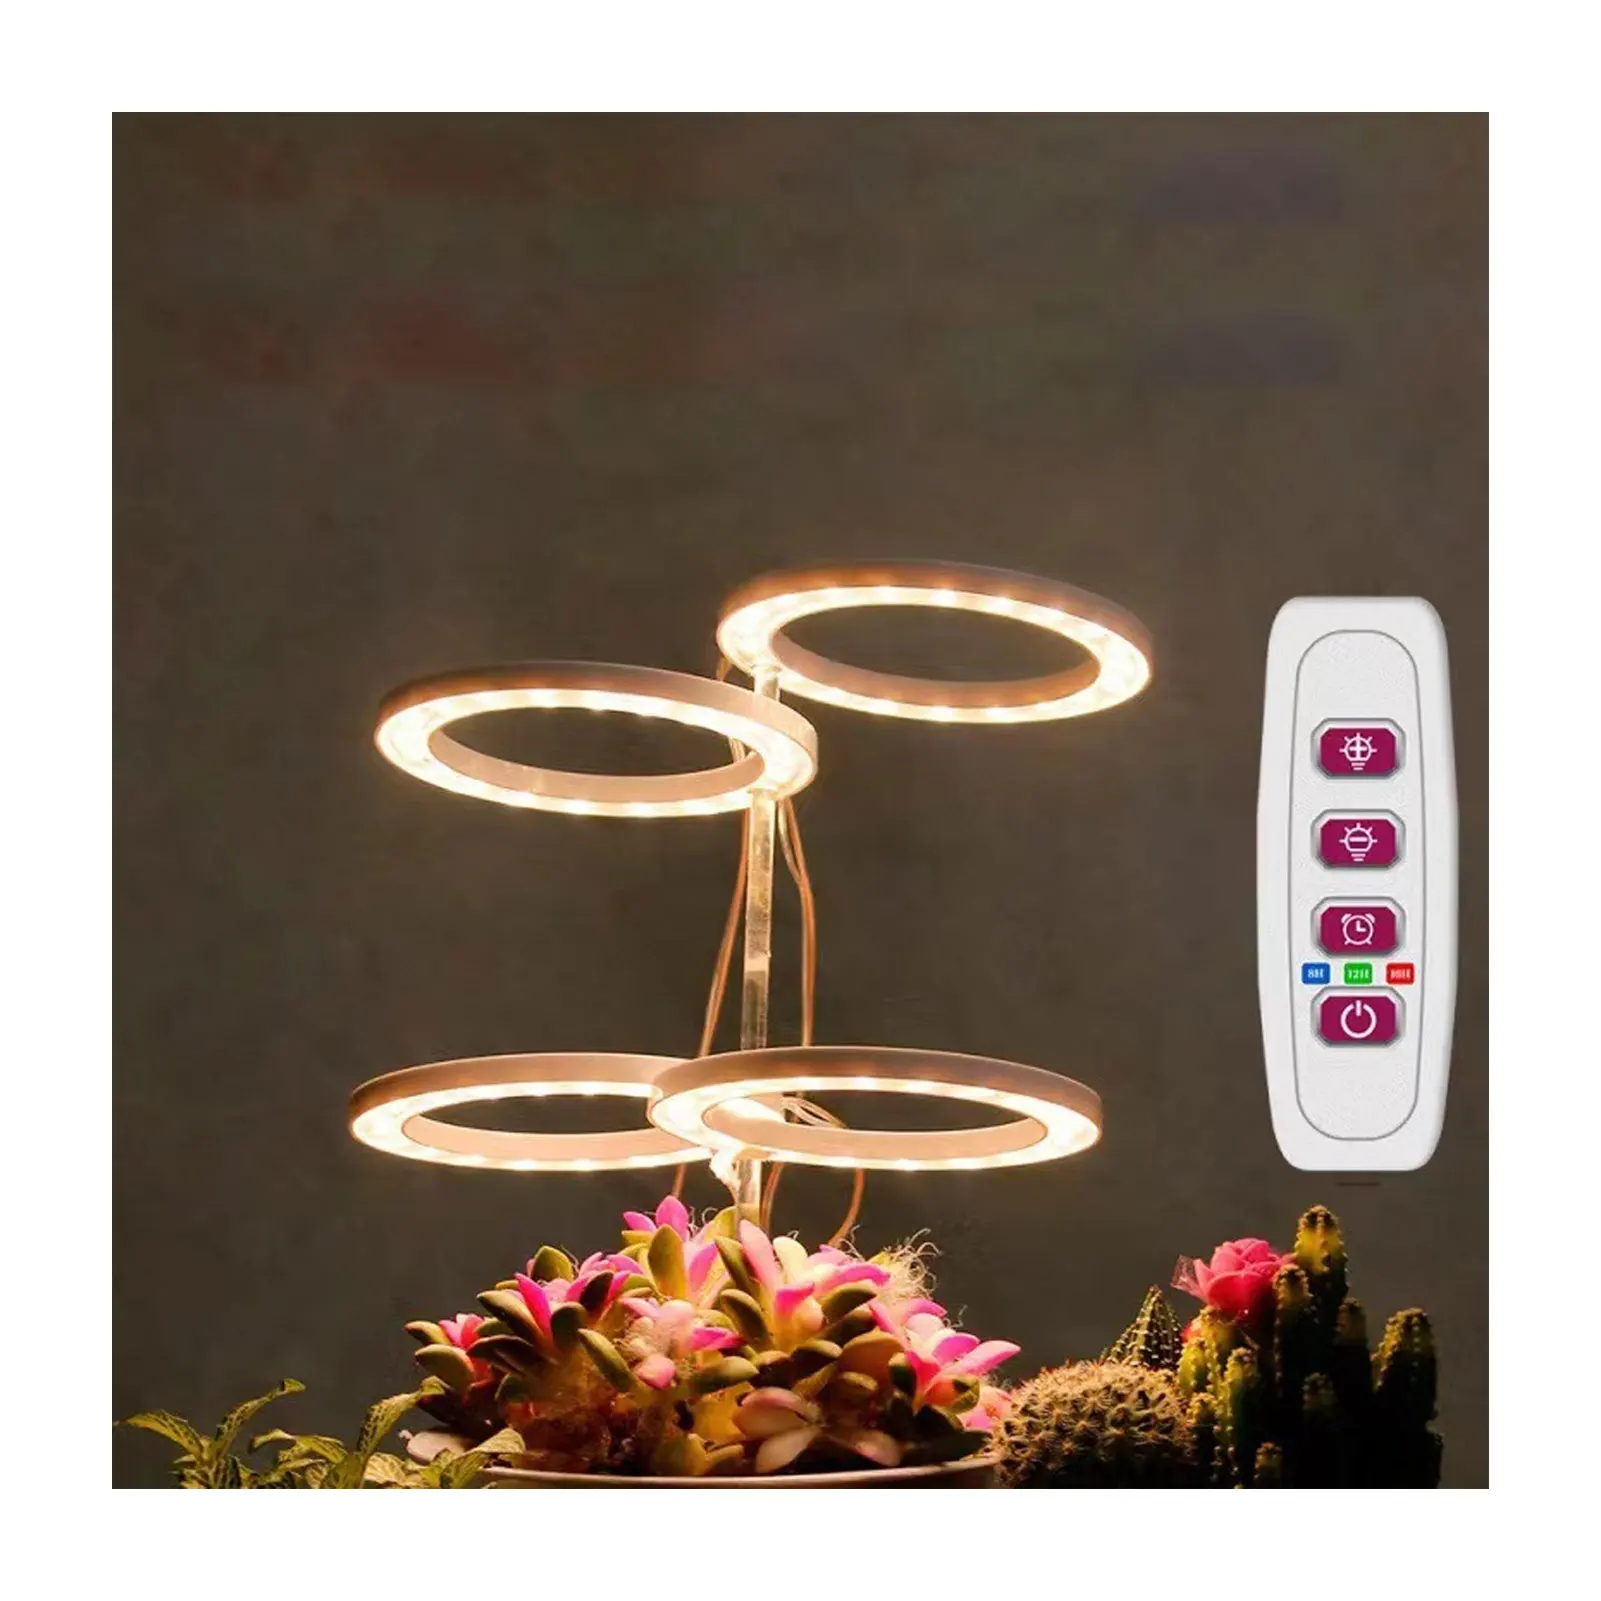 S Usb Powered Simulated Sunlight Lamp For Bonsai Succulents Plants Thj99